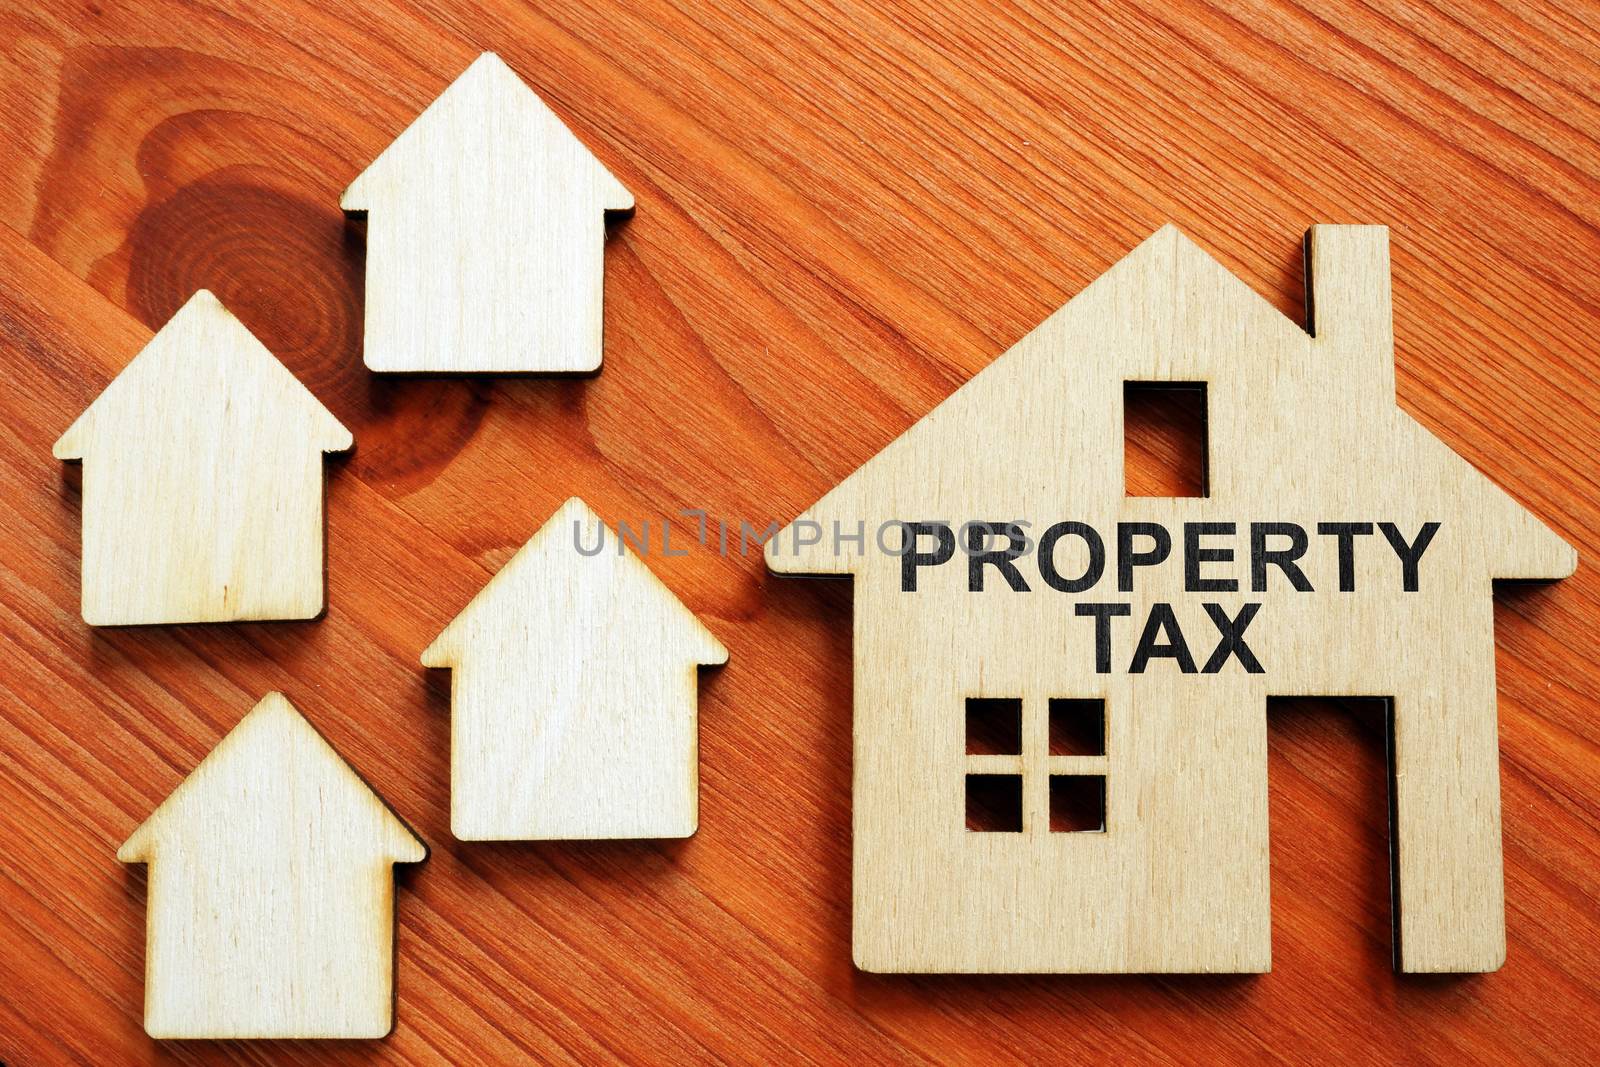 Property Tax sign and small houses.